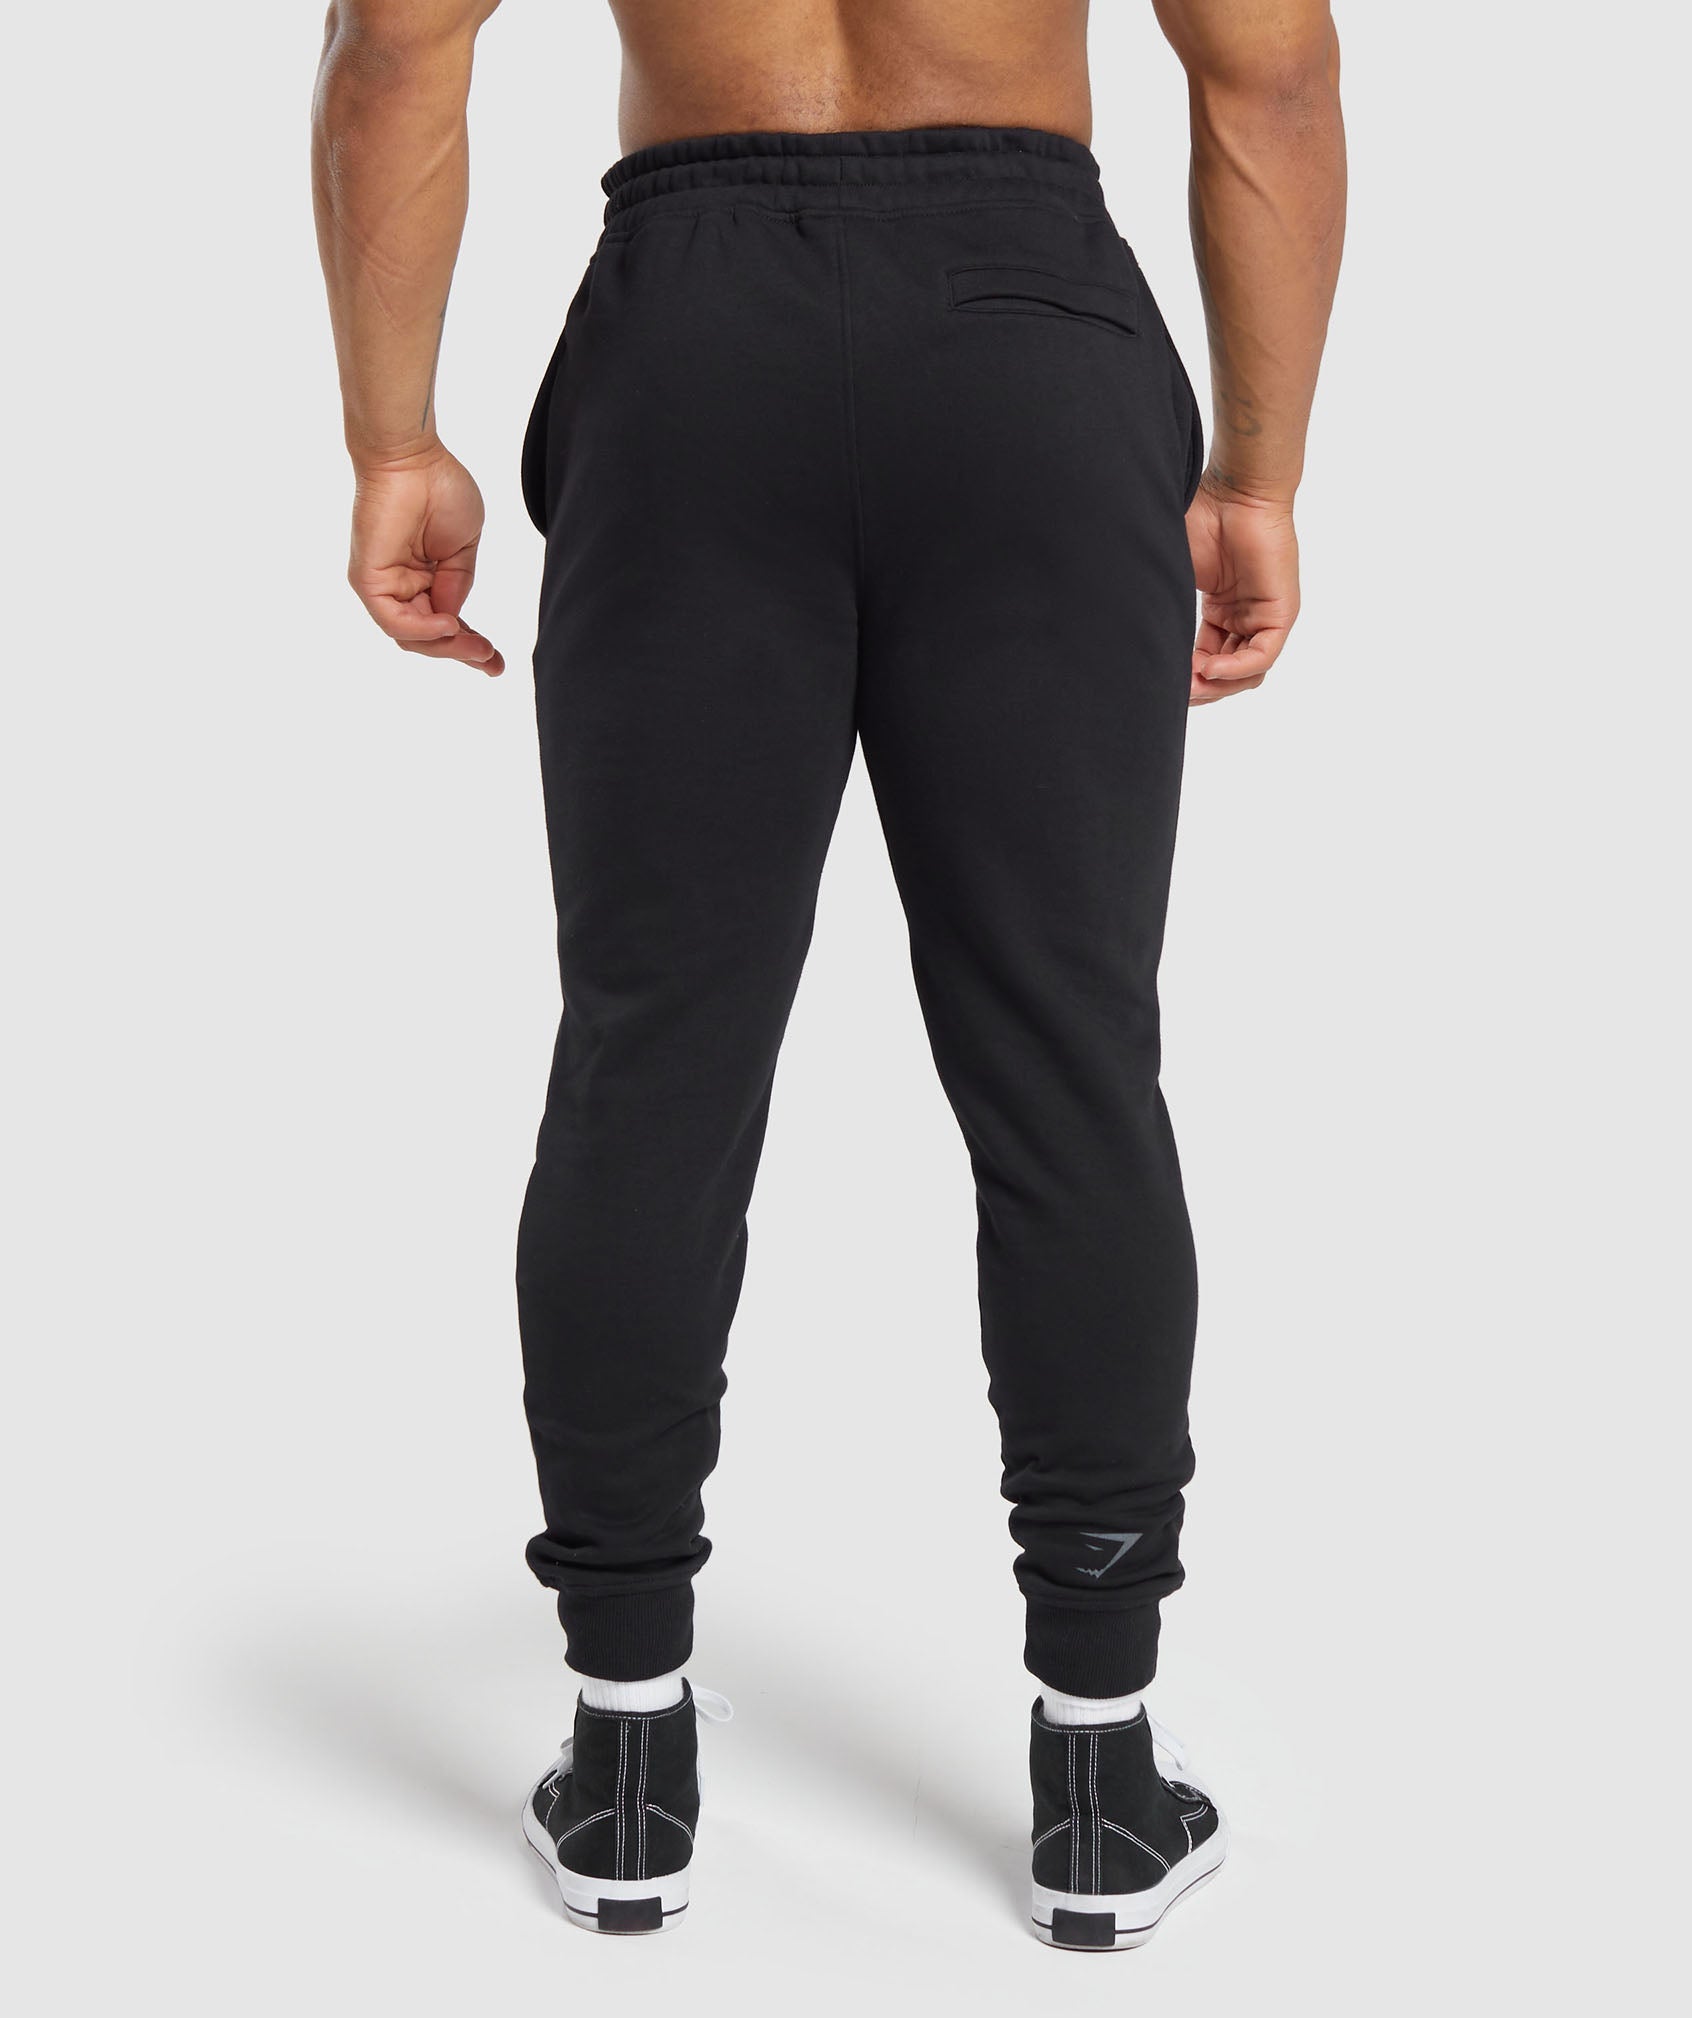 Lifting Joggers in Black - view 2